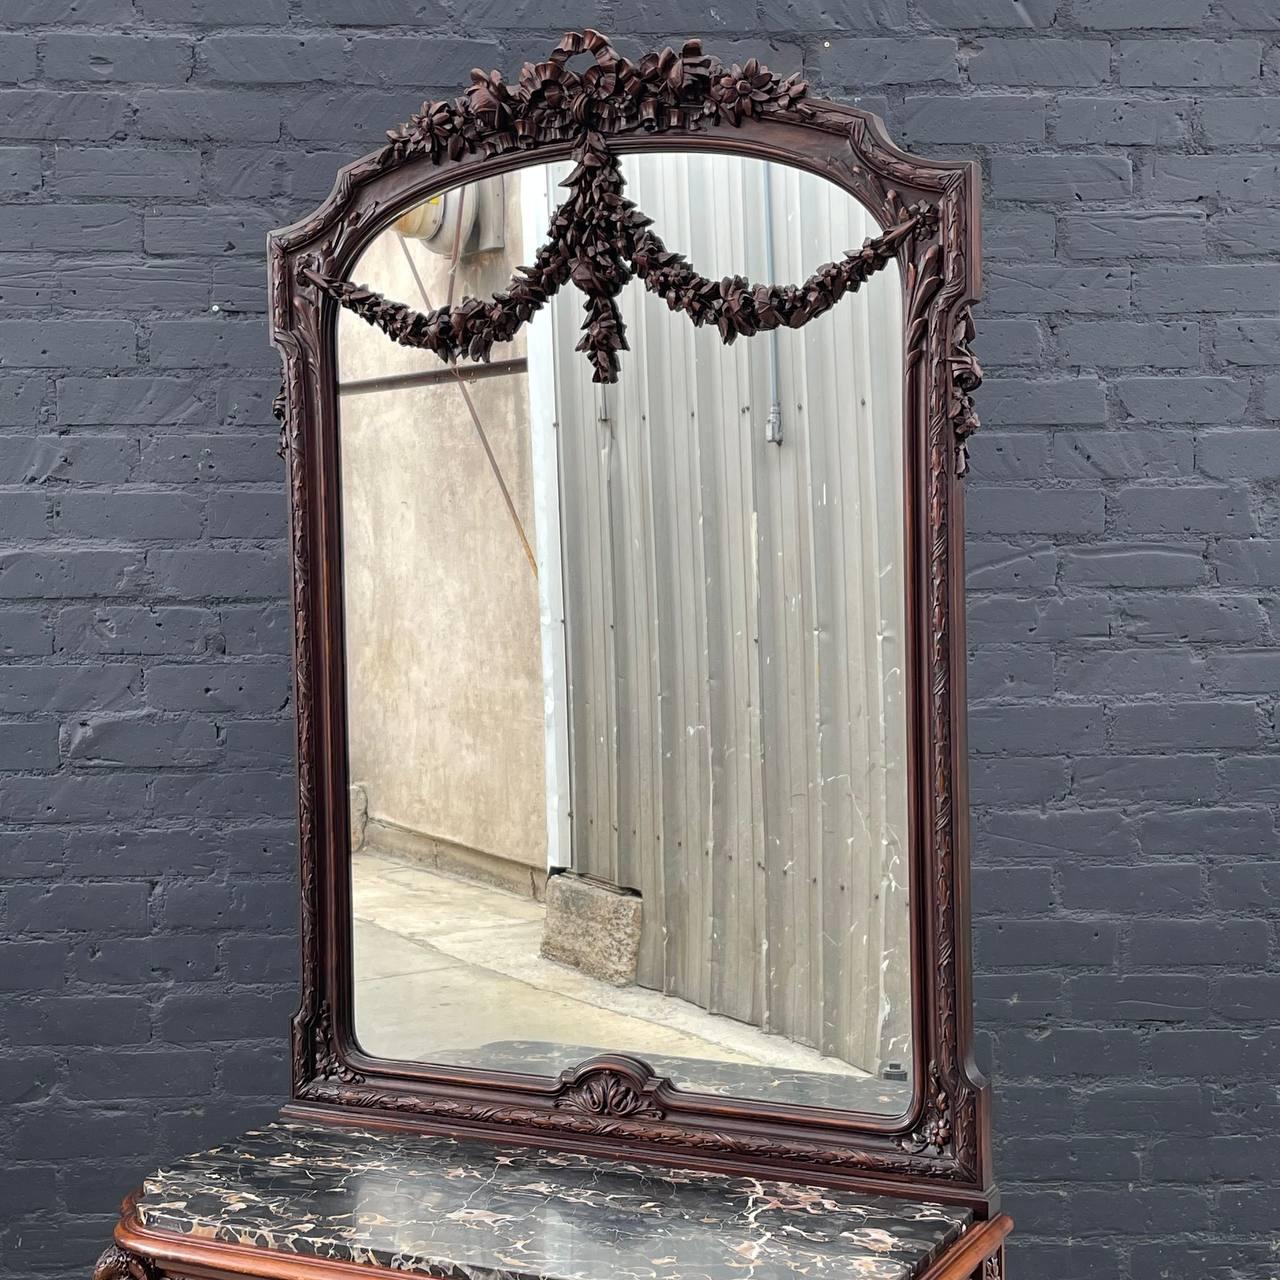 Antique French Louis XVI Louis XVI-Style Console Table with Mirror

Designer: Unknwon
Country: France
Manufacturer: Unknown
Materials: Carved Wood, Mirror
Style: French Louis XVI
Year: 1920’s

$7,500

Dimensions:
86”H x 28”W x